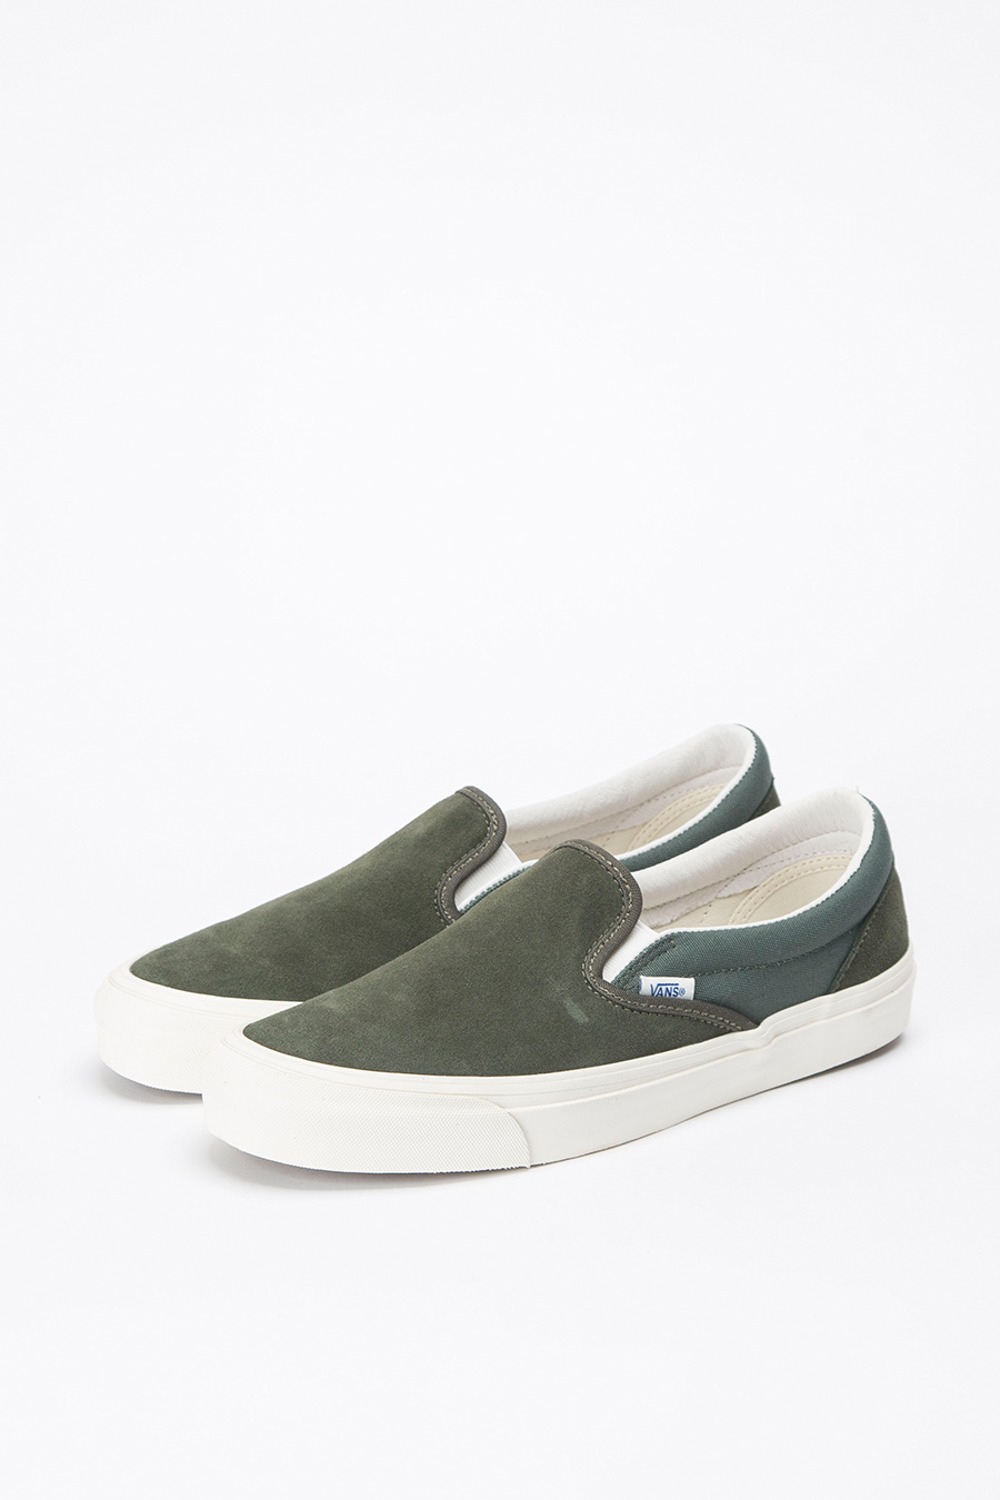 OG CLASSIC SLIP-ON LX(SUEDE/CANVAS)FOREST NIGHT